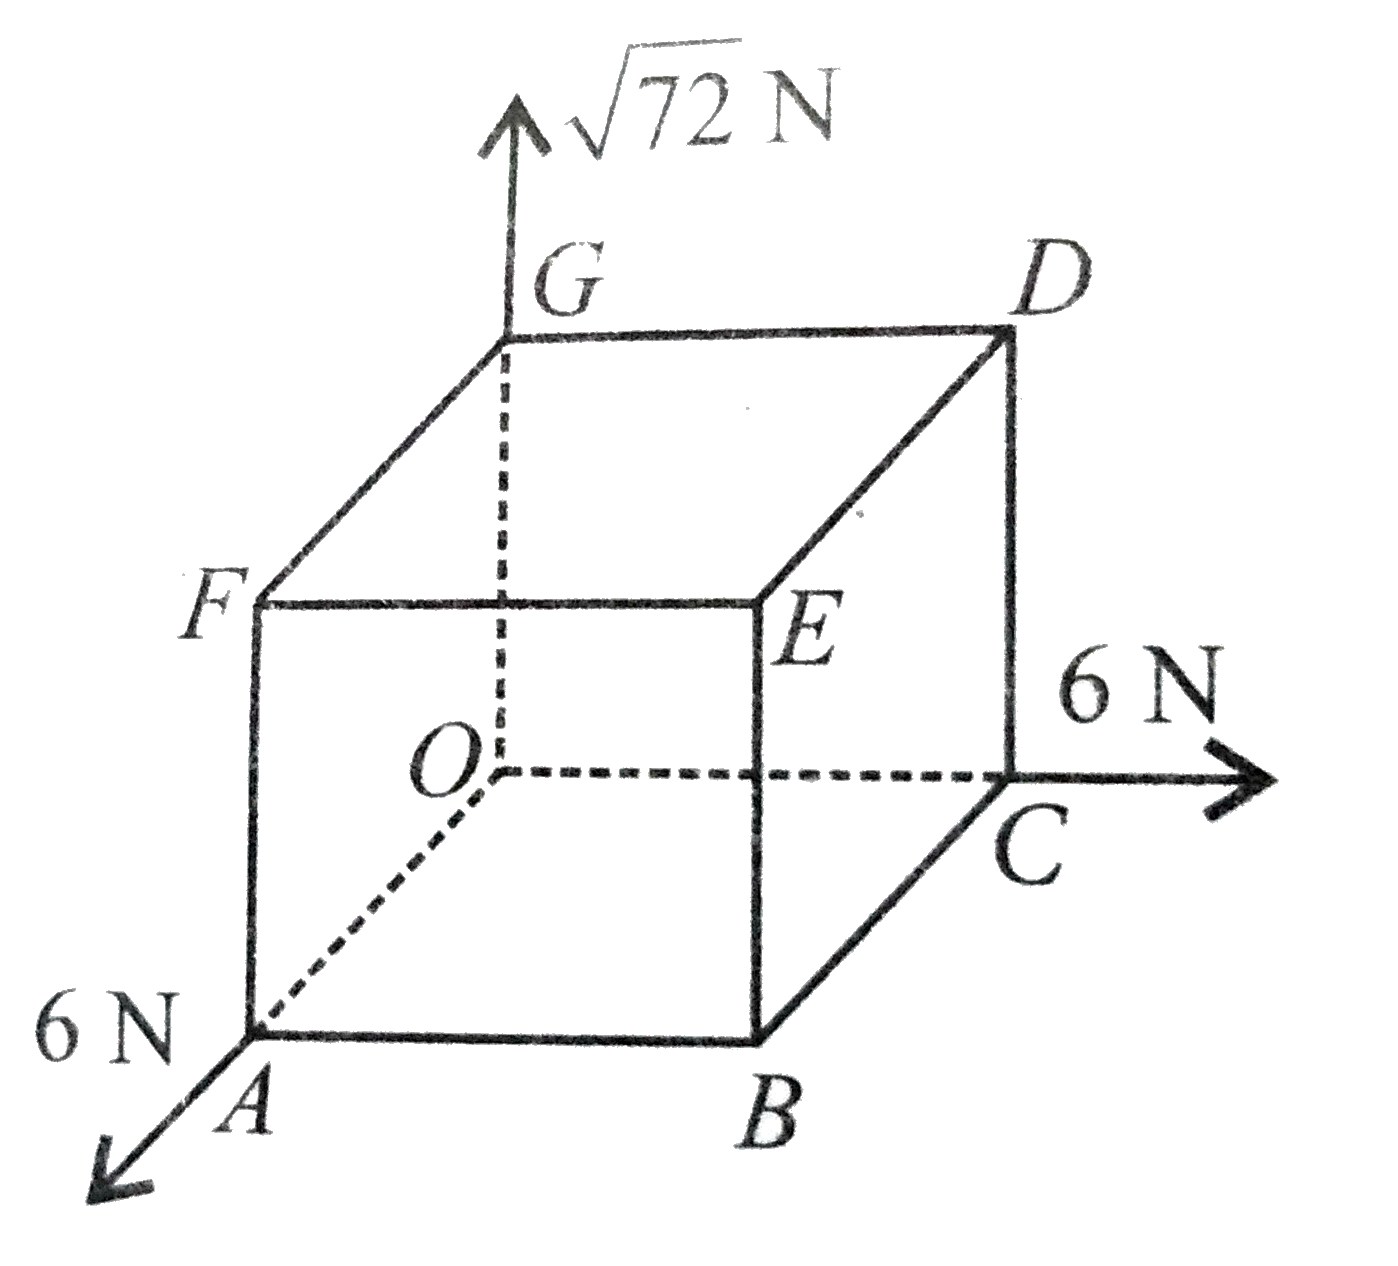 Three forces of magnitudes 6 N, 6 N an d sqrt(72) N act at corner of cube along three sides as shown in figure. Resultant of these forces is